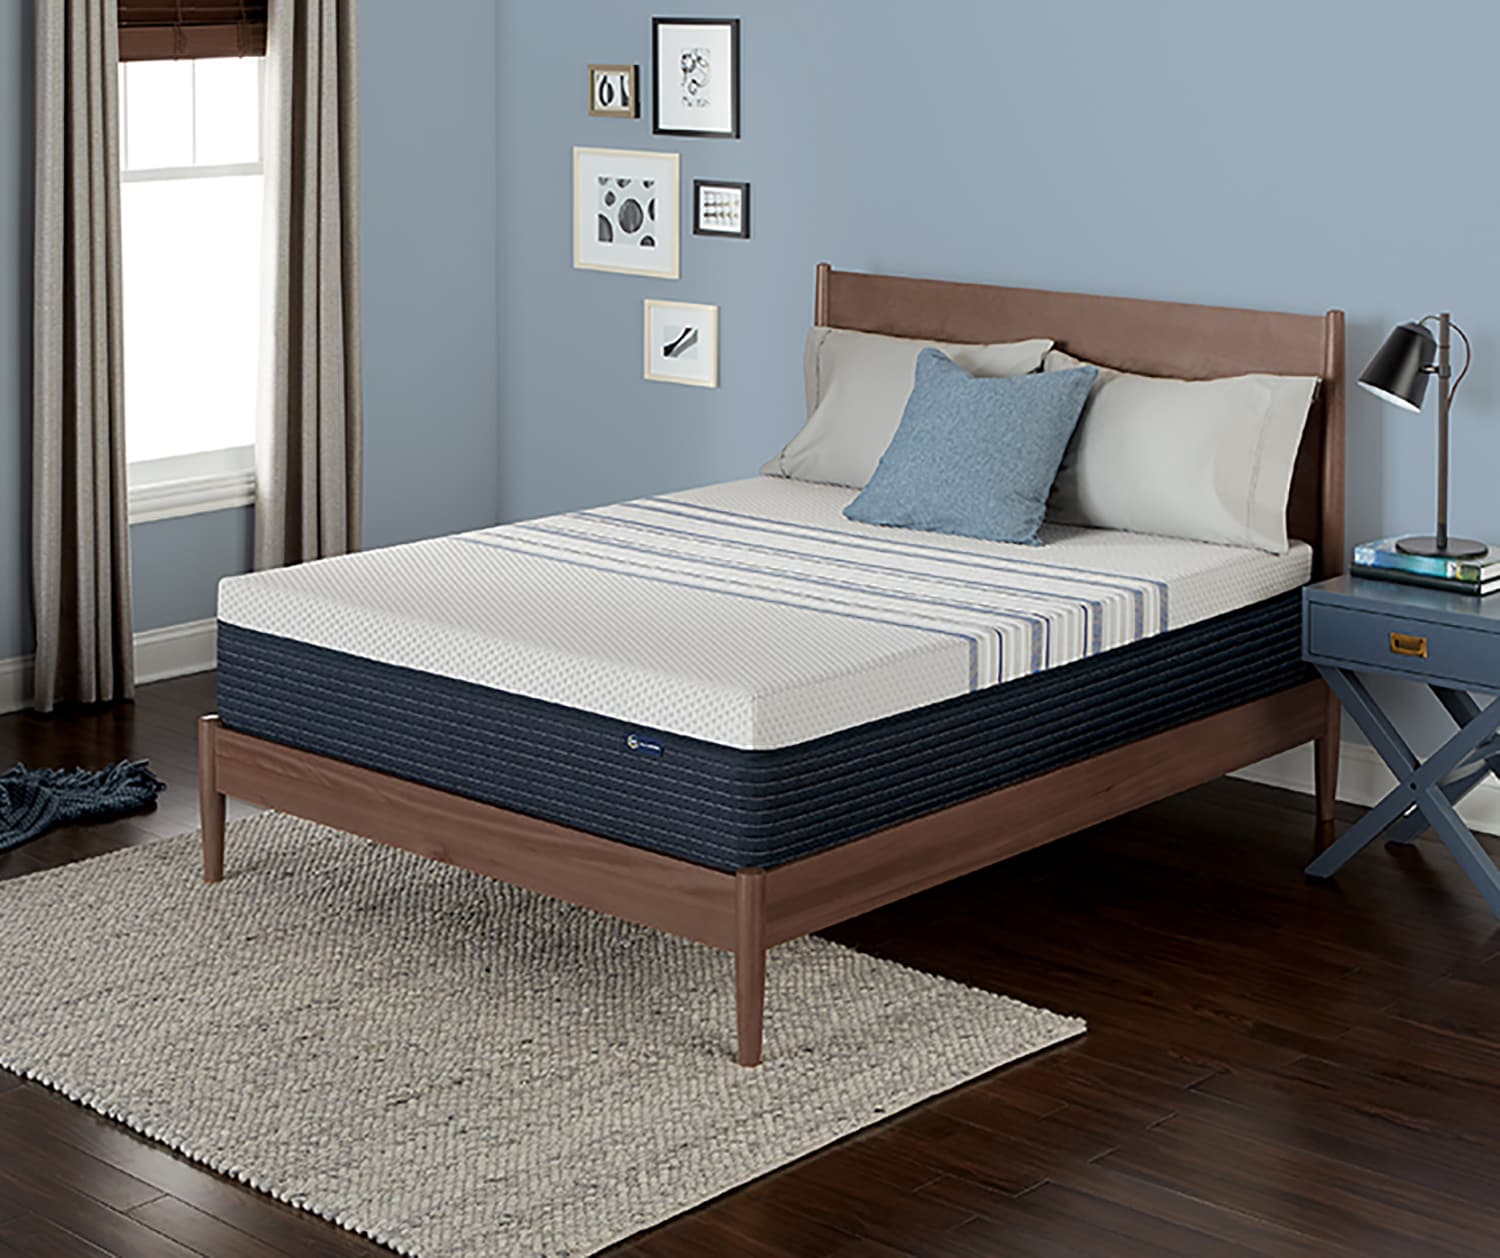 ans Mattress Guard 2ea Gold Silver 2Colors Prevent The Mattress from Sliding Off Bed (Silver)